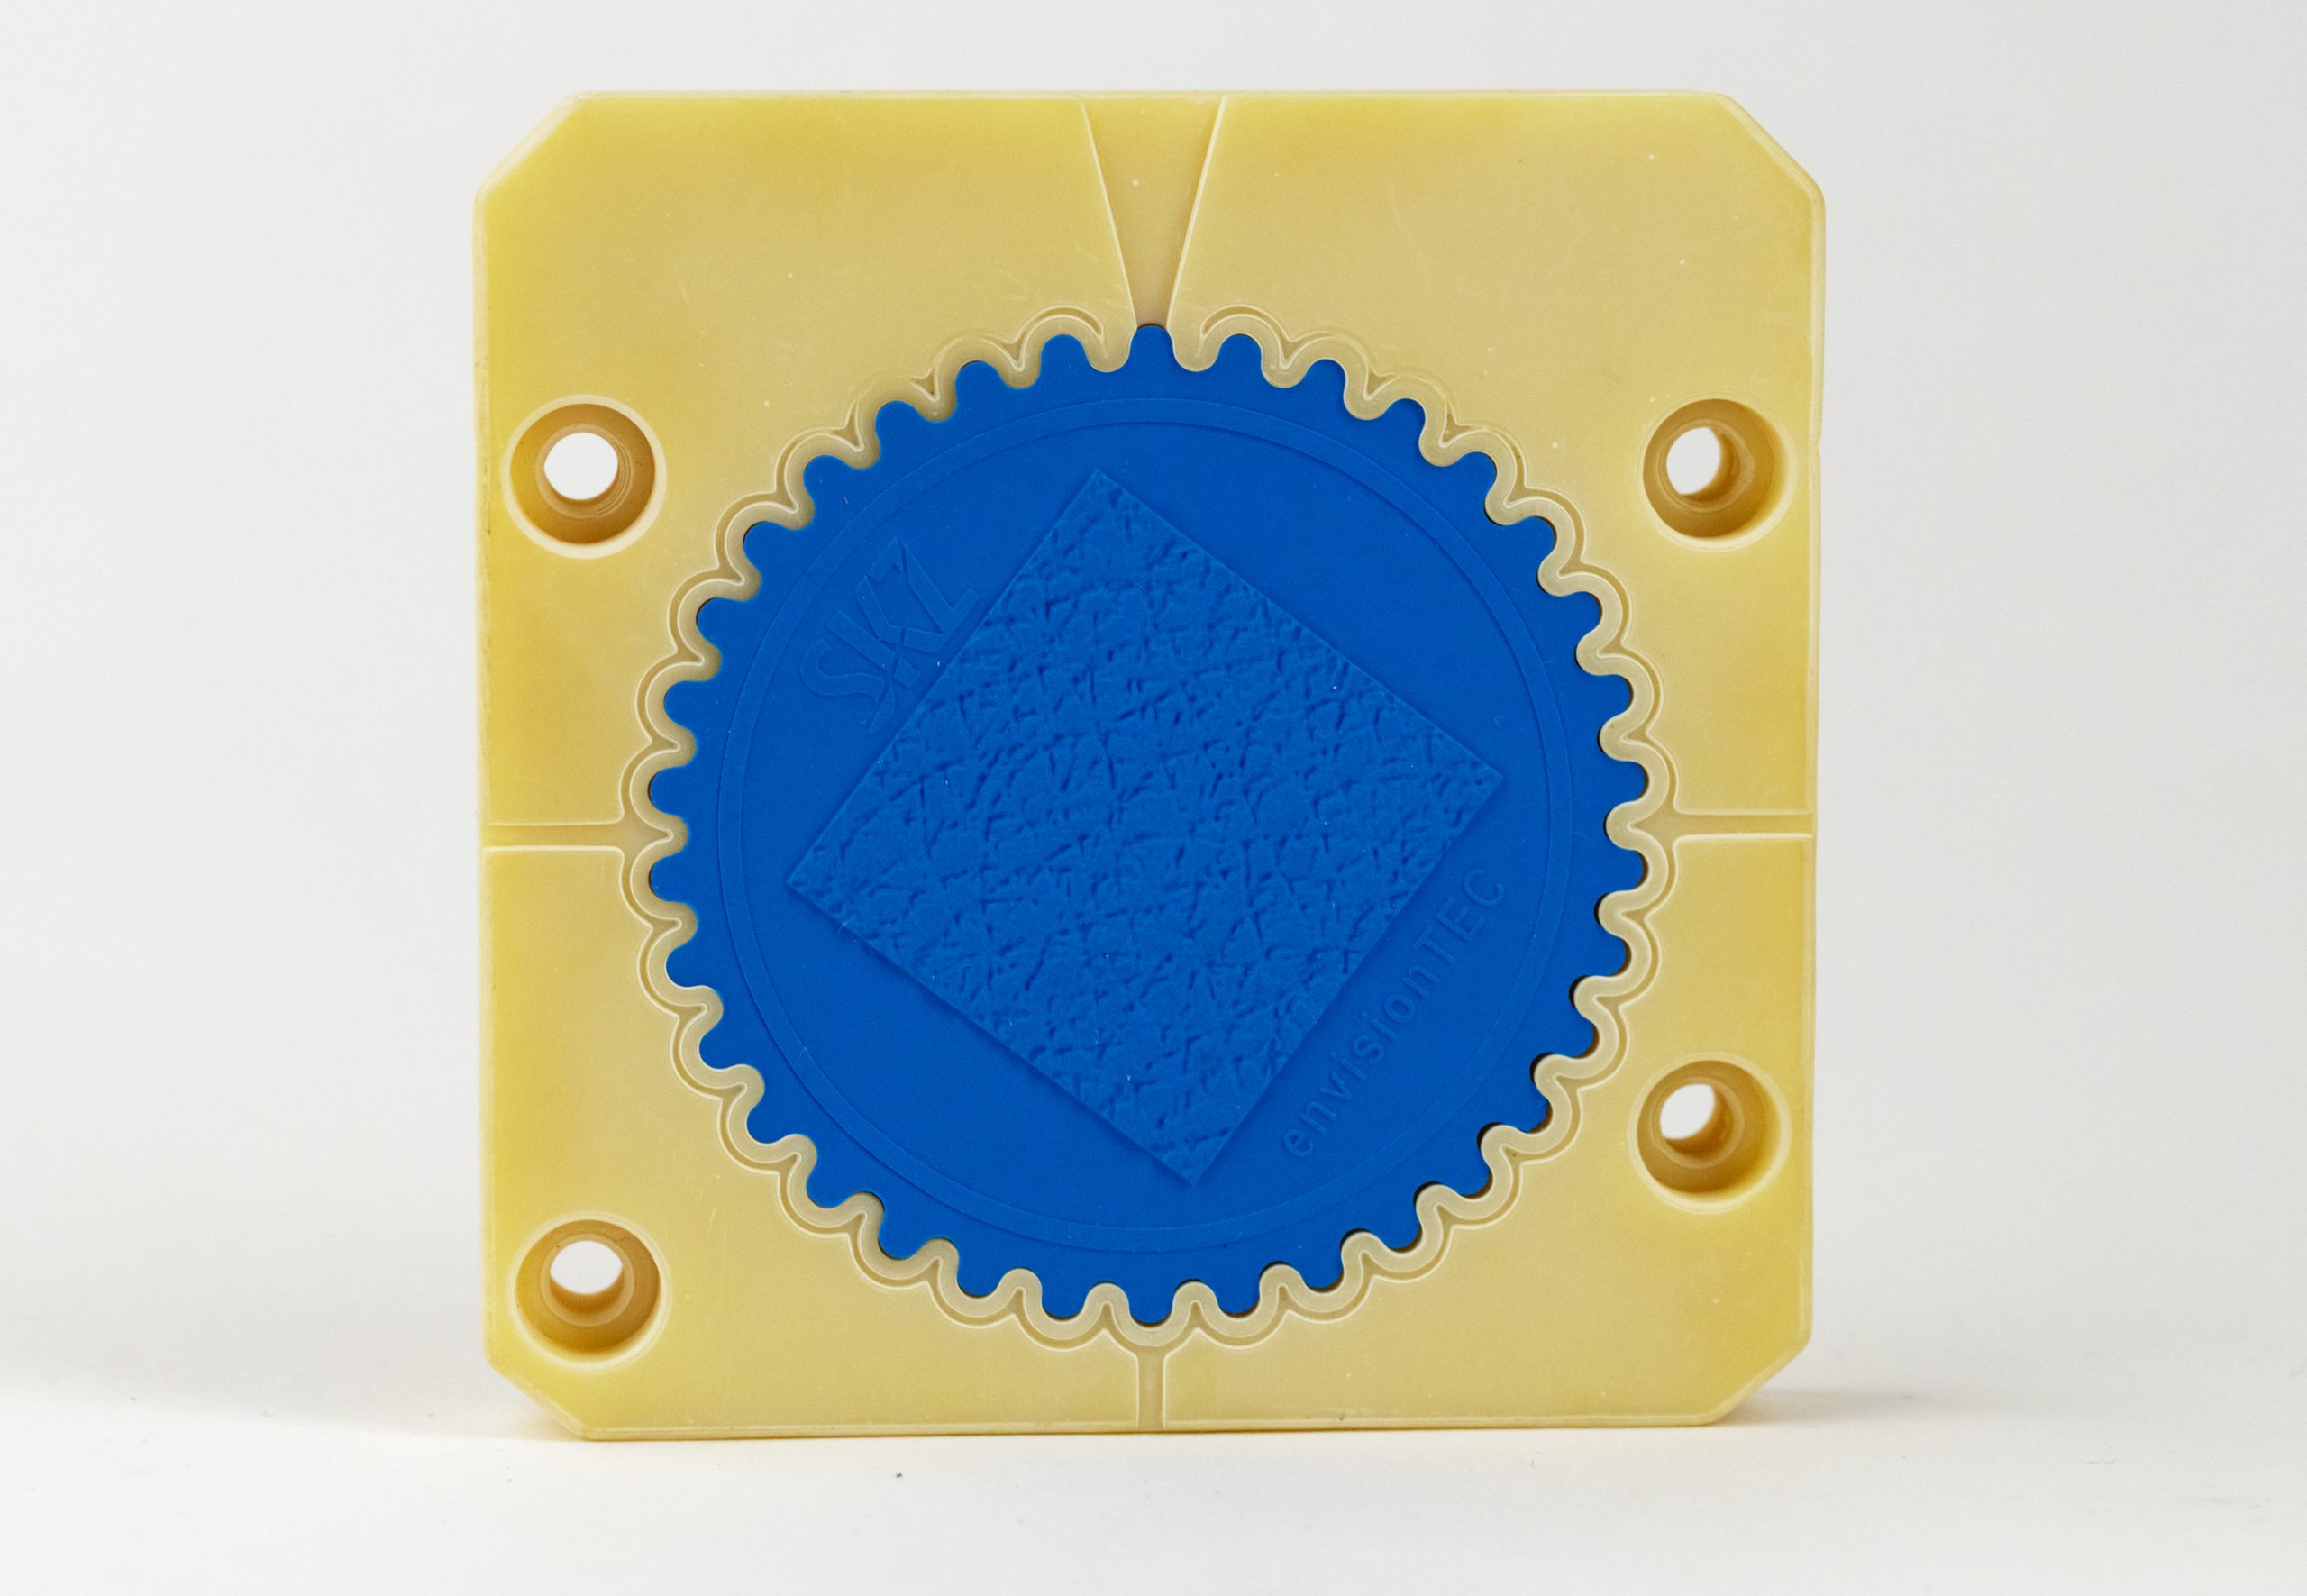 An injection molded part using a 3D printed tool. Photo via EnvisionTEC.